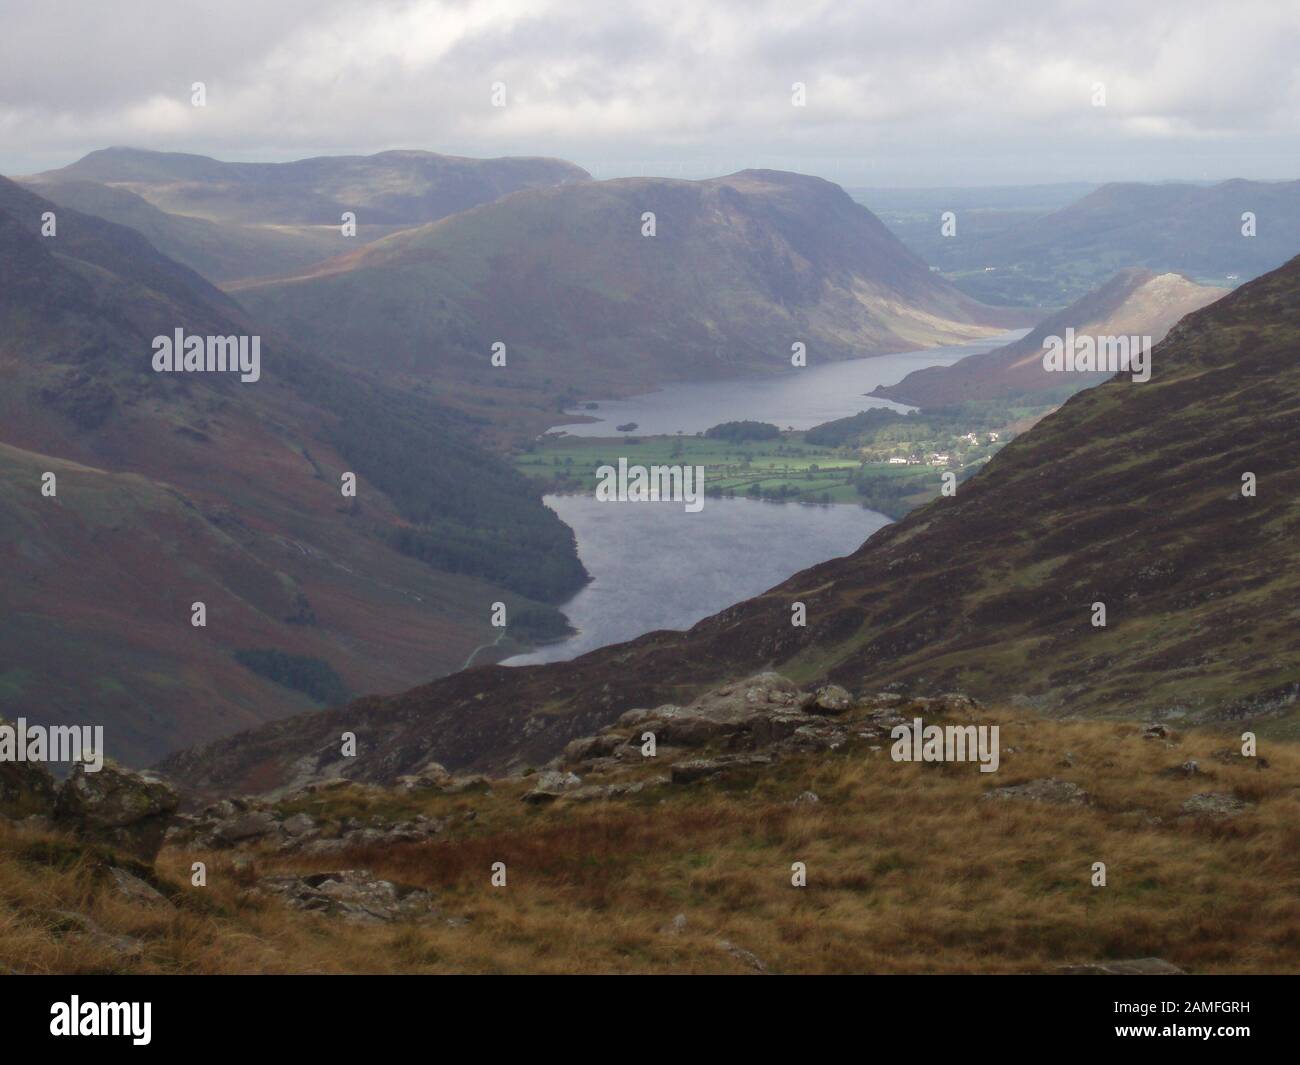 Lake district landscapes UK showing mountain rugged terrain and lakes/streams Stock Photo